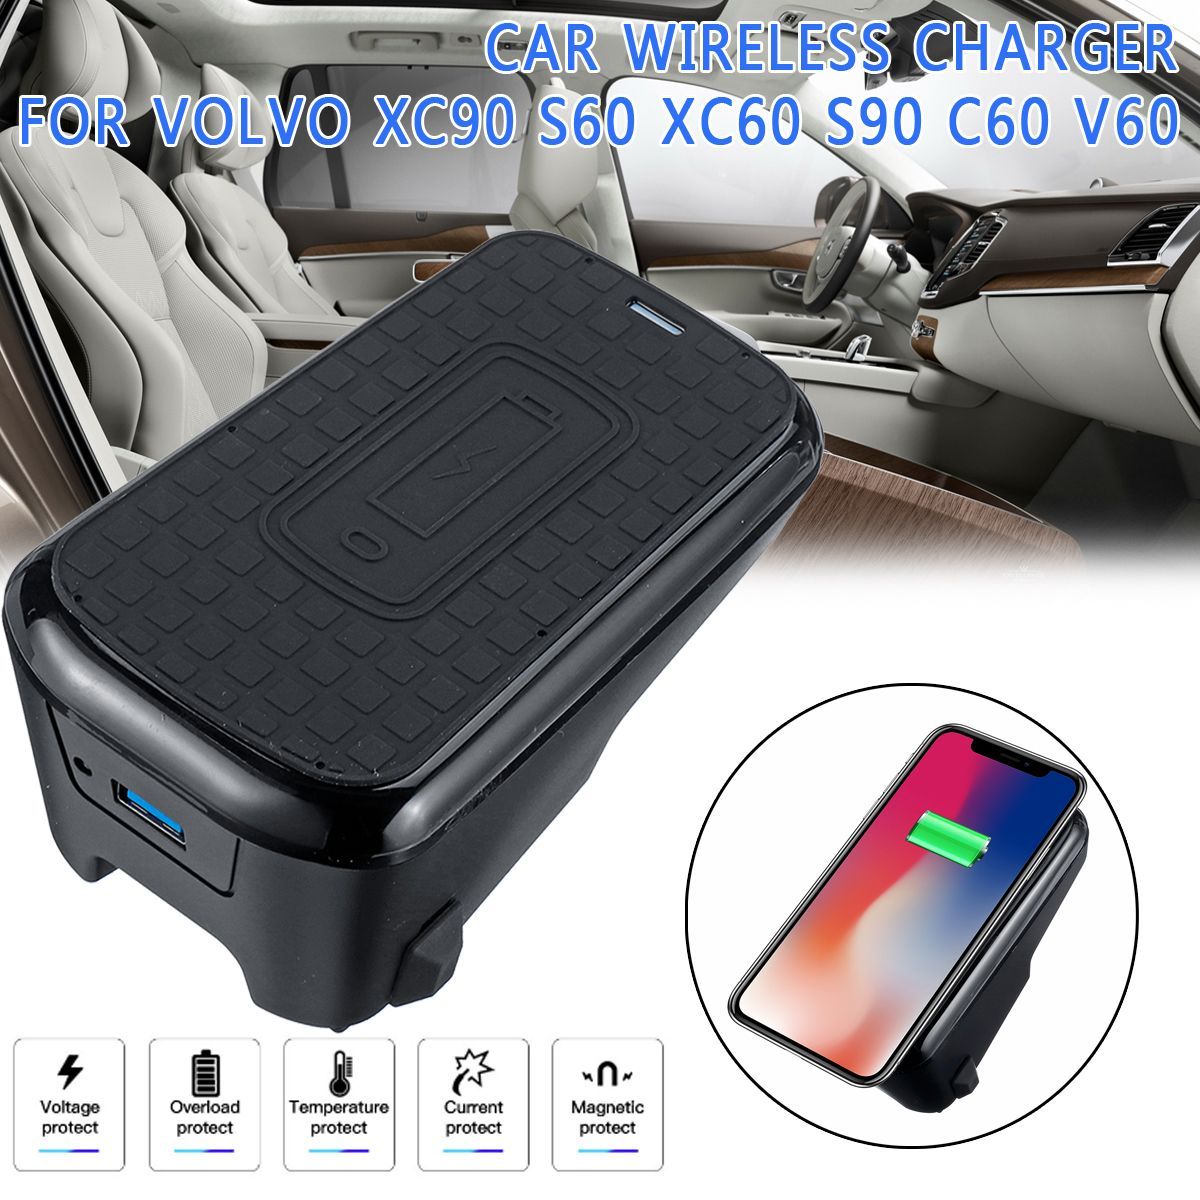 Car-Wireless-Charger-Phone-Mount-Holder-For-Volvo-XC90-S60-XC60-S90-C60-V60-1534310